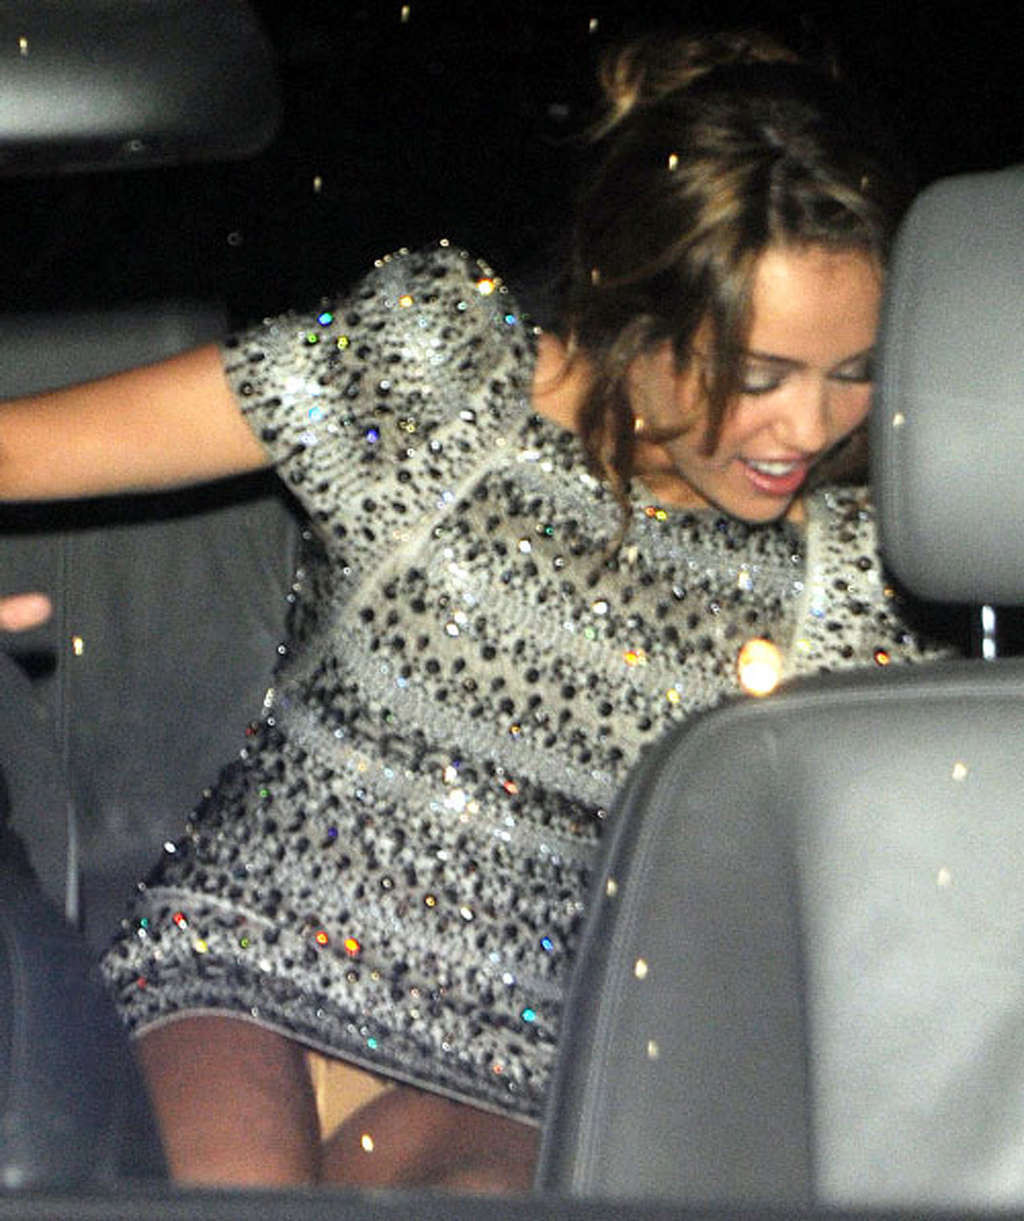 Miley Cyrus exposing her nice legs in shorts and upskirt paparazzi pictures #75361121